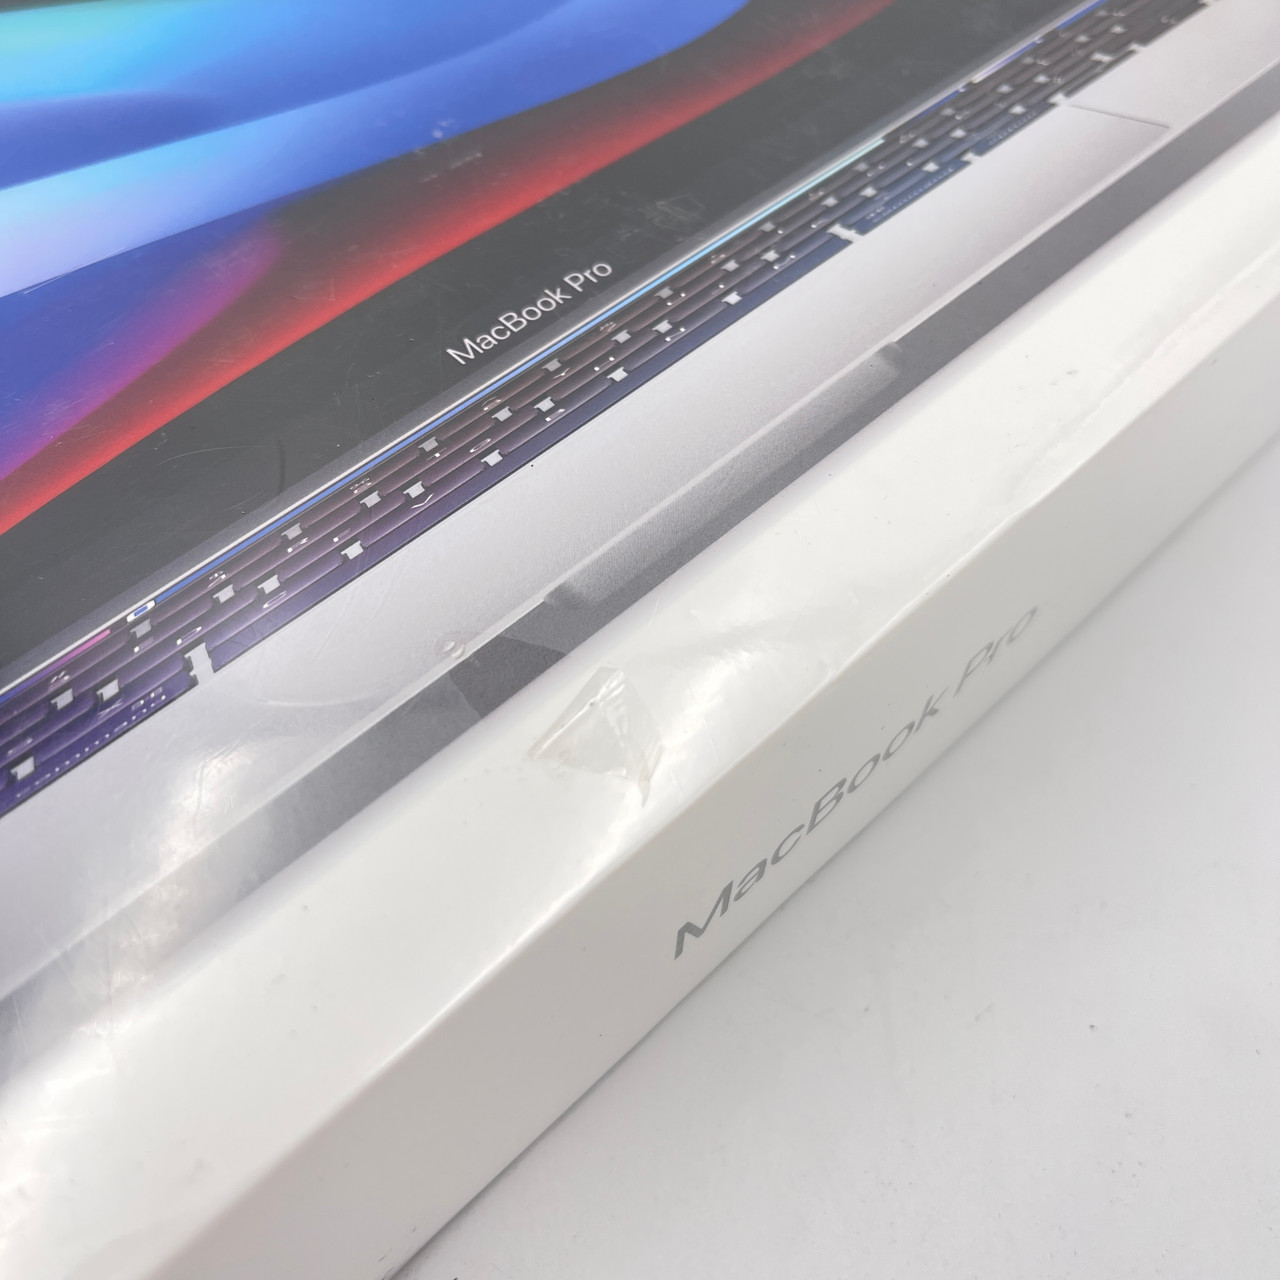 Apple MacBook Pro 2019 Touch Bar Space Gray - Core i9, 16GB RAM, 1TB SSD - New